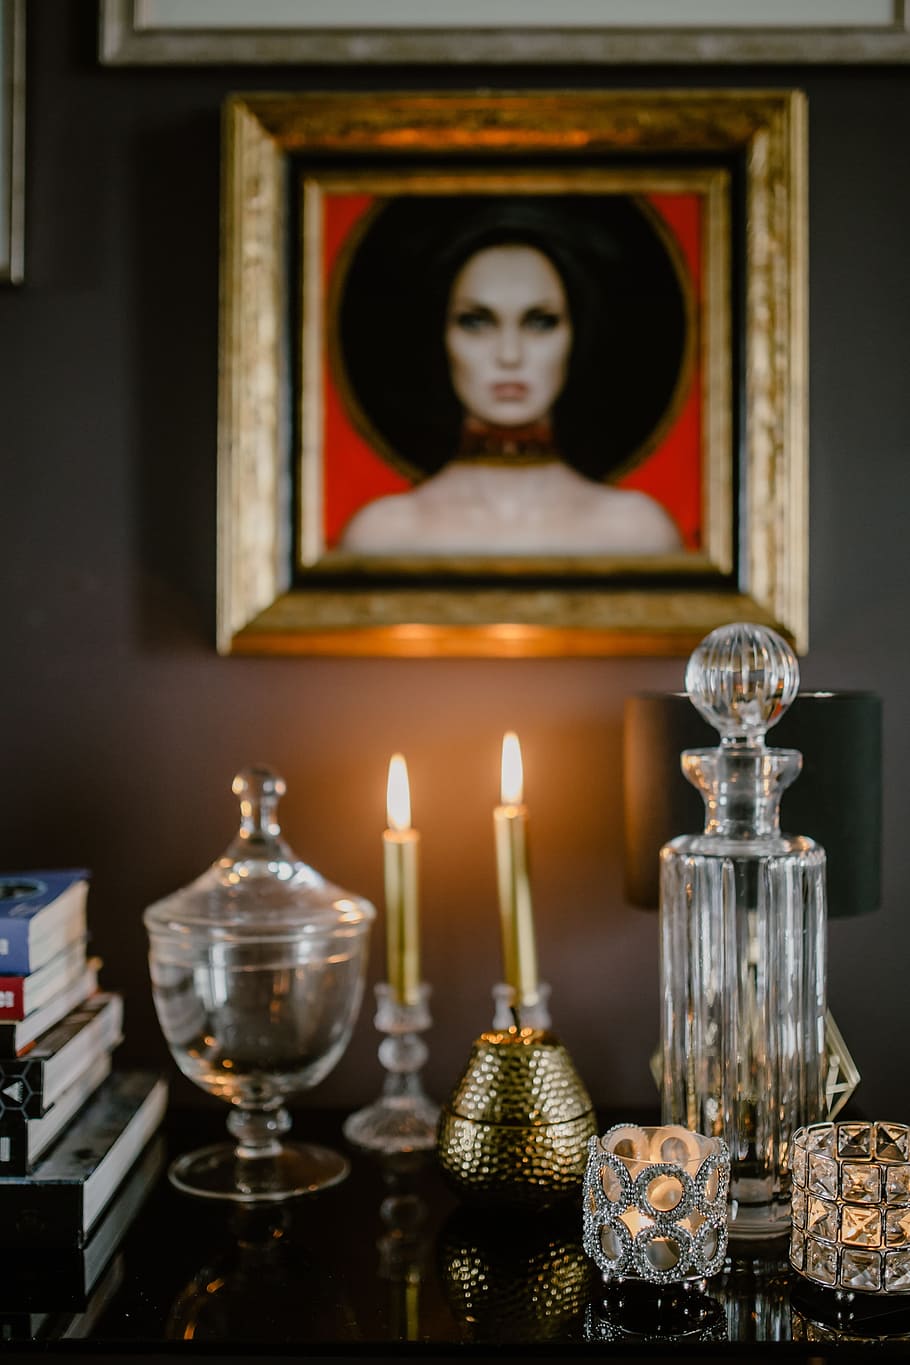 decanter, candles, painting, wall, interior, home, magazines, essentials, books, decor